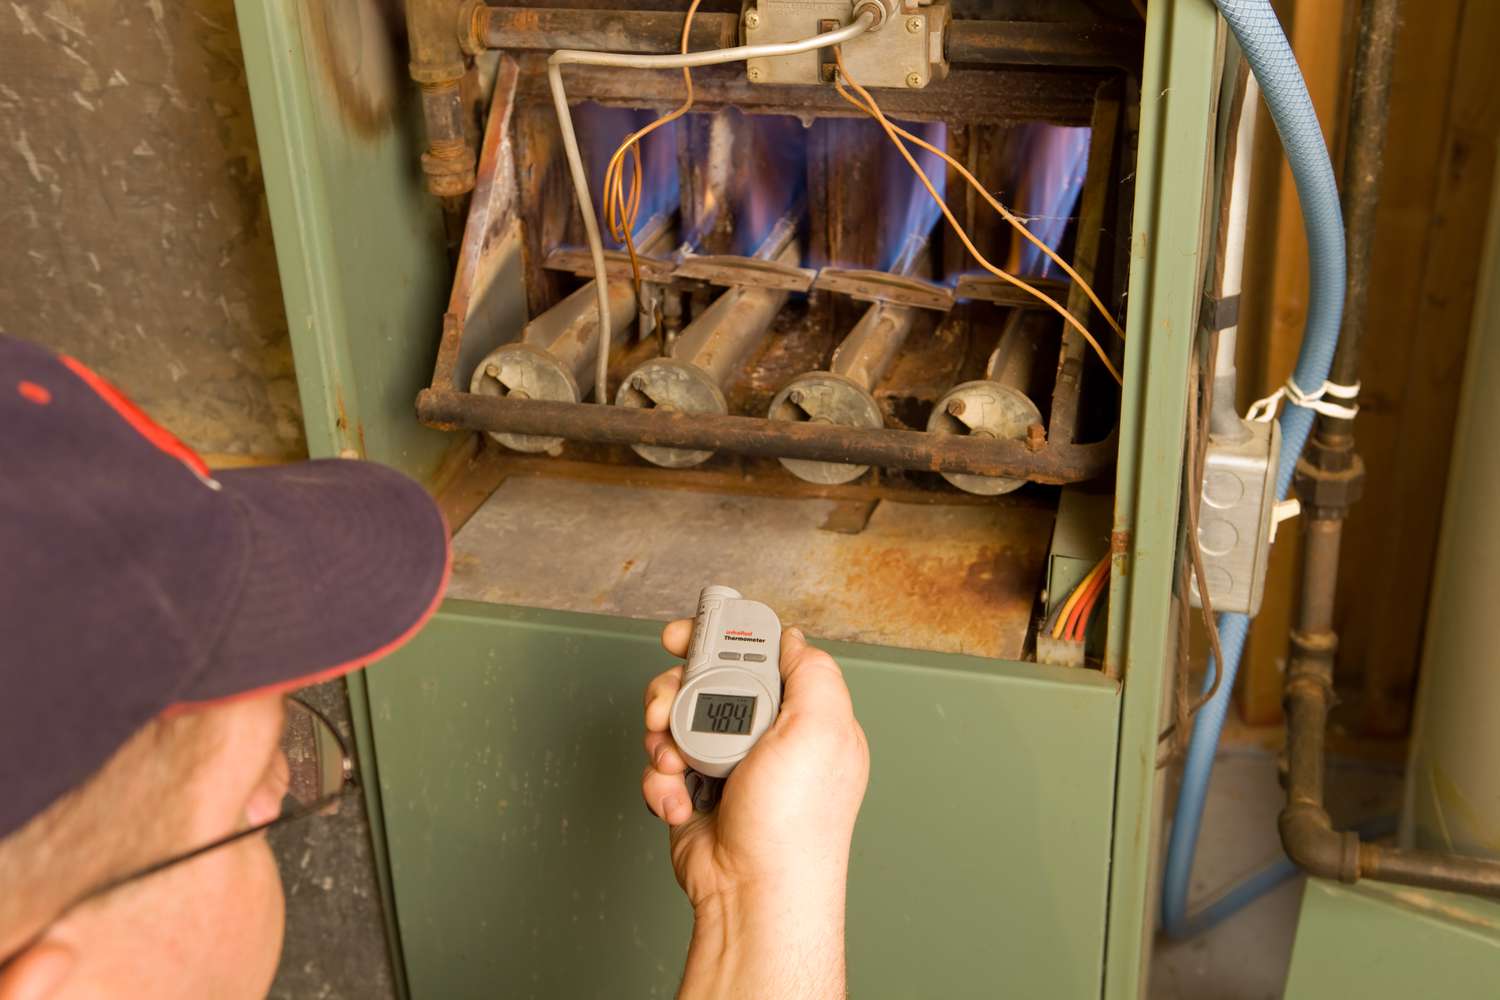 How To Light Pilot On Furnace With Electronic Ignition